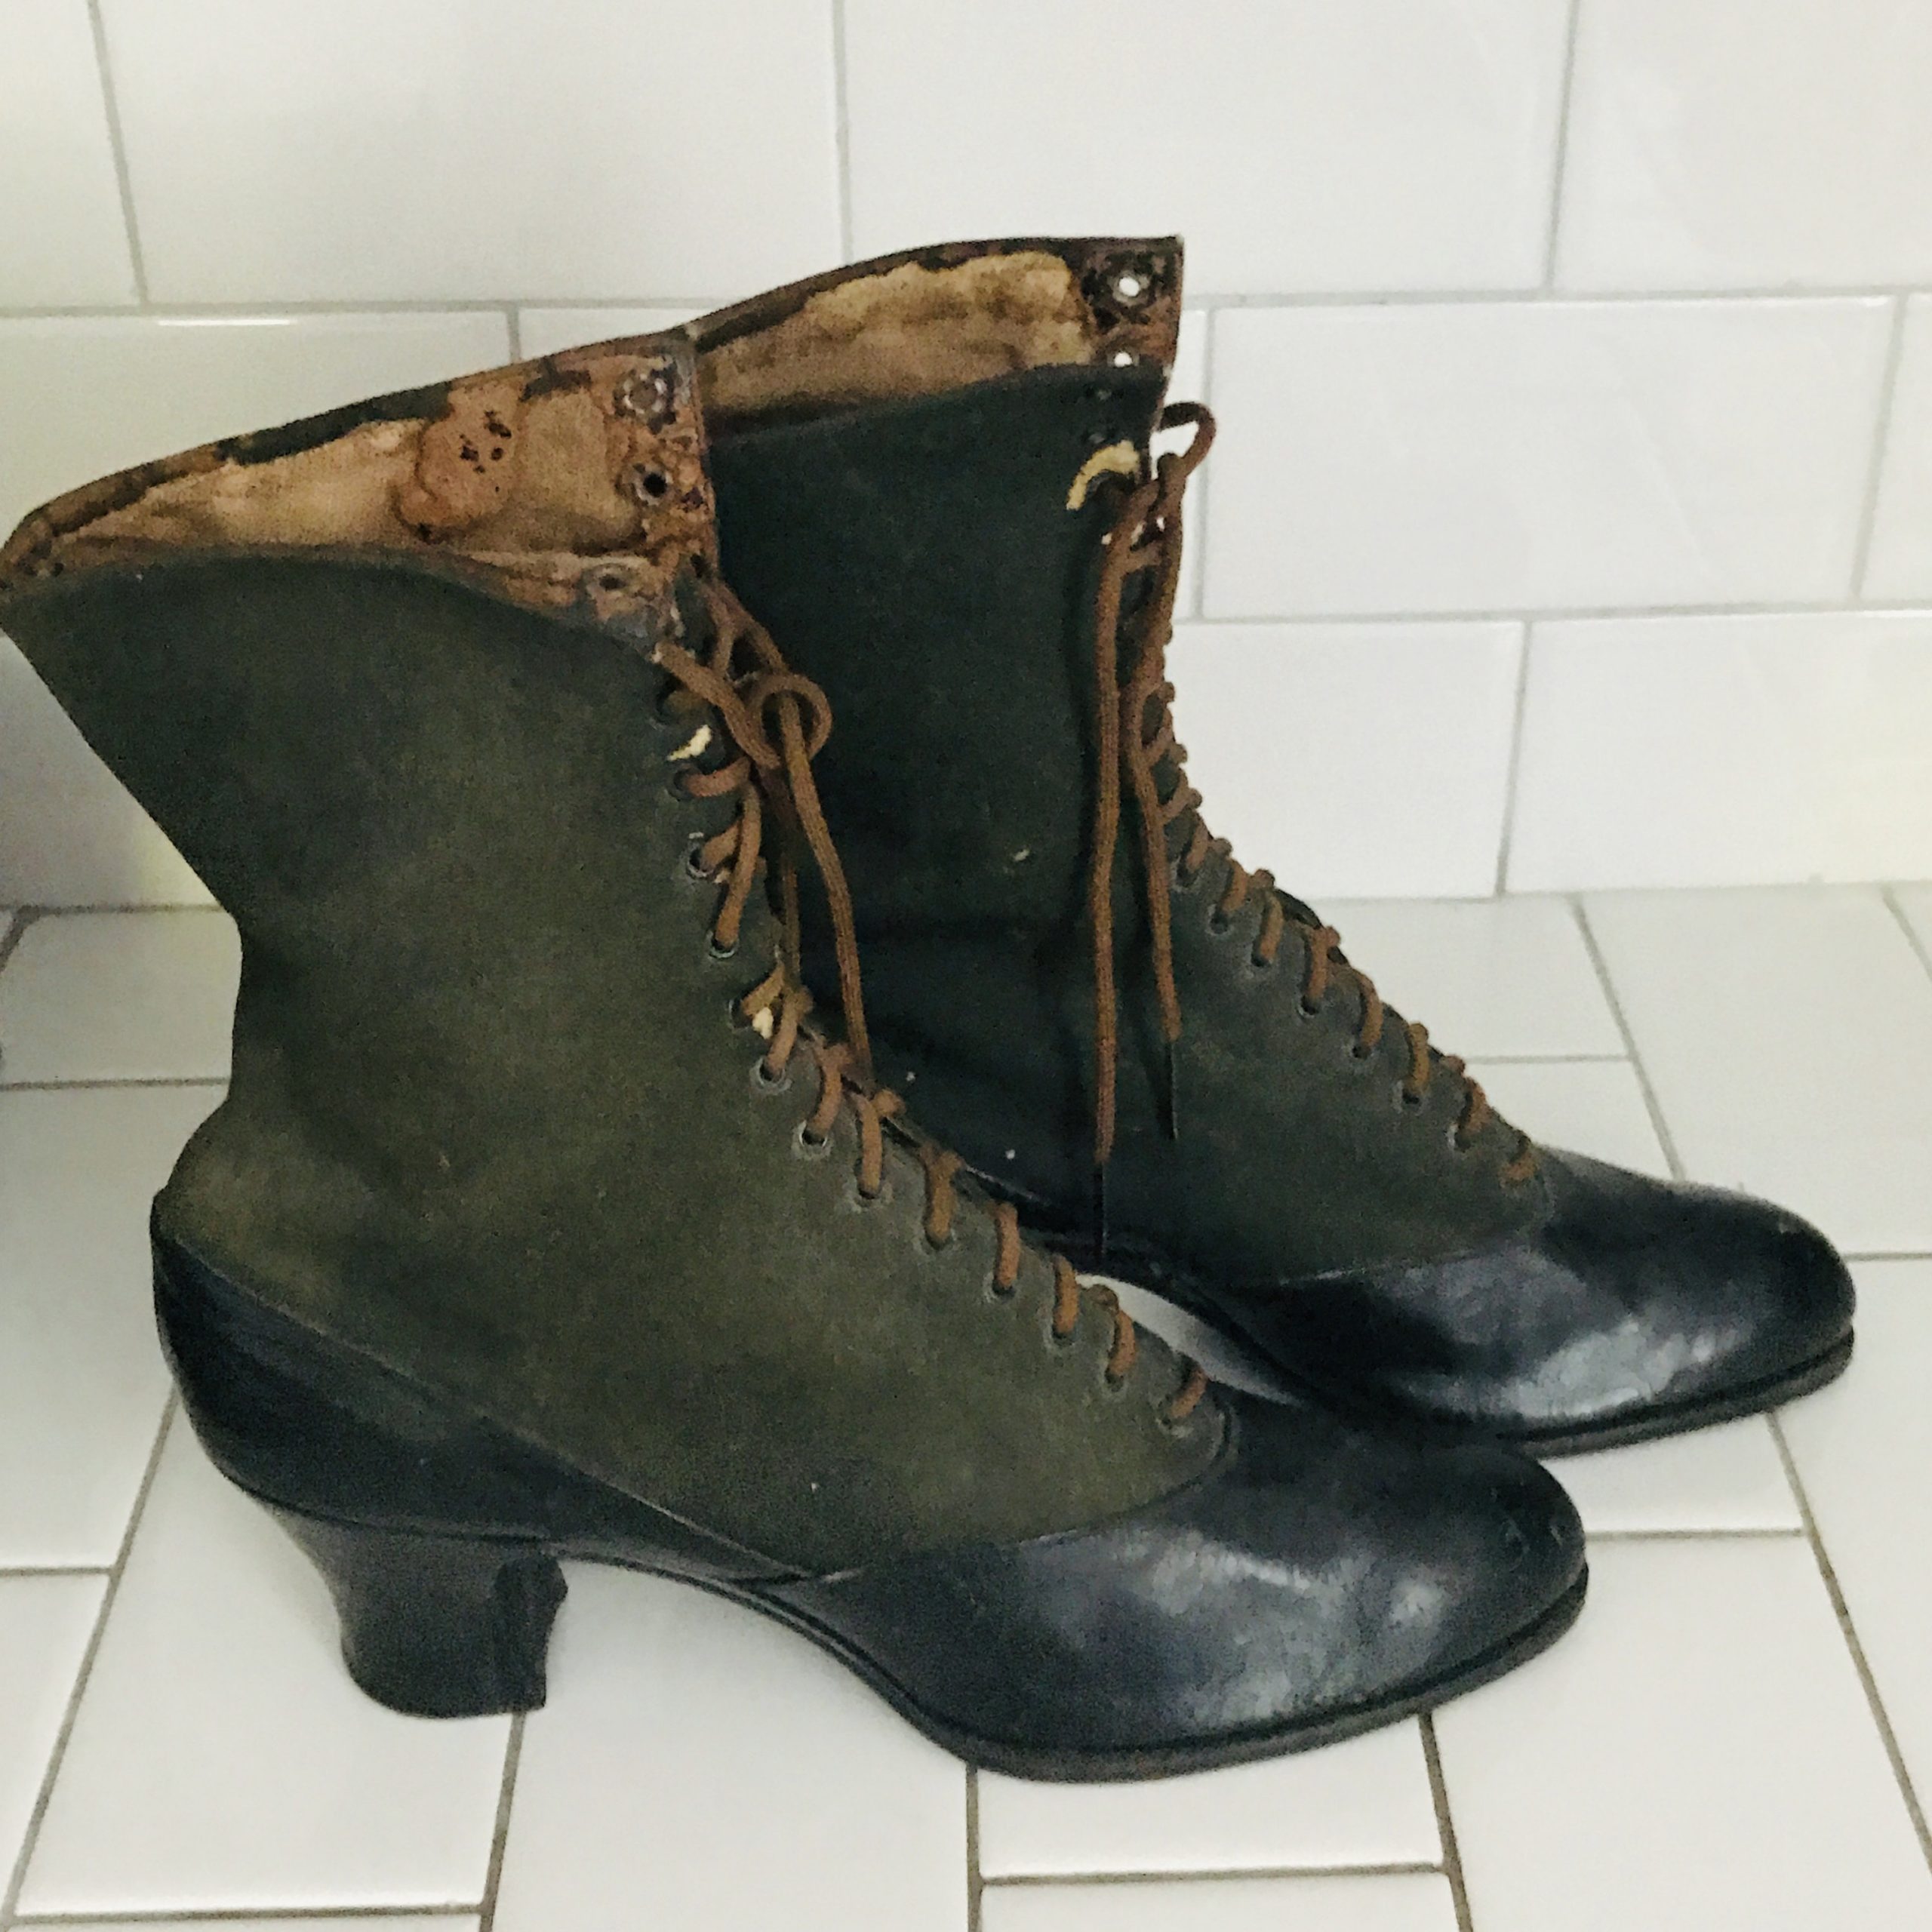 victorian vintage boots womens